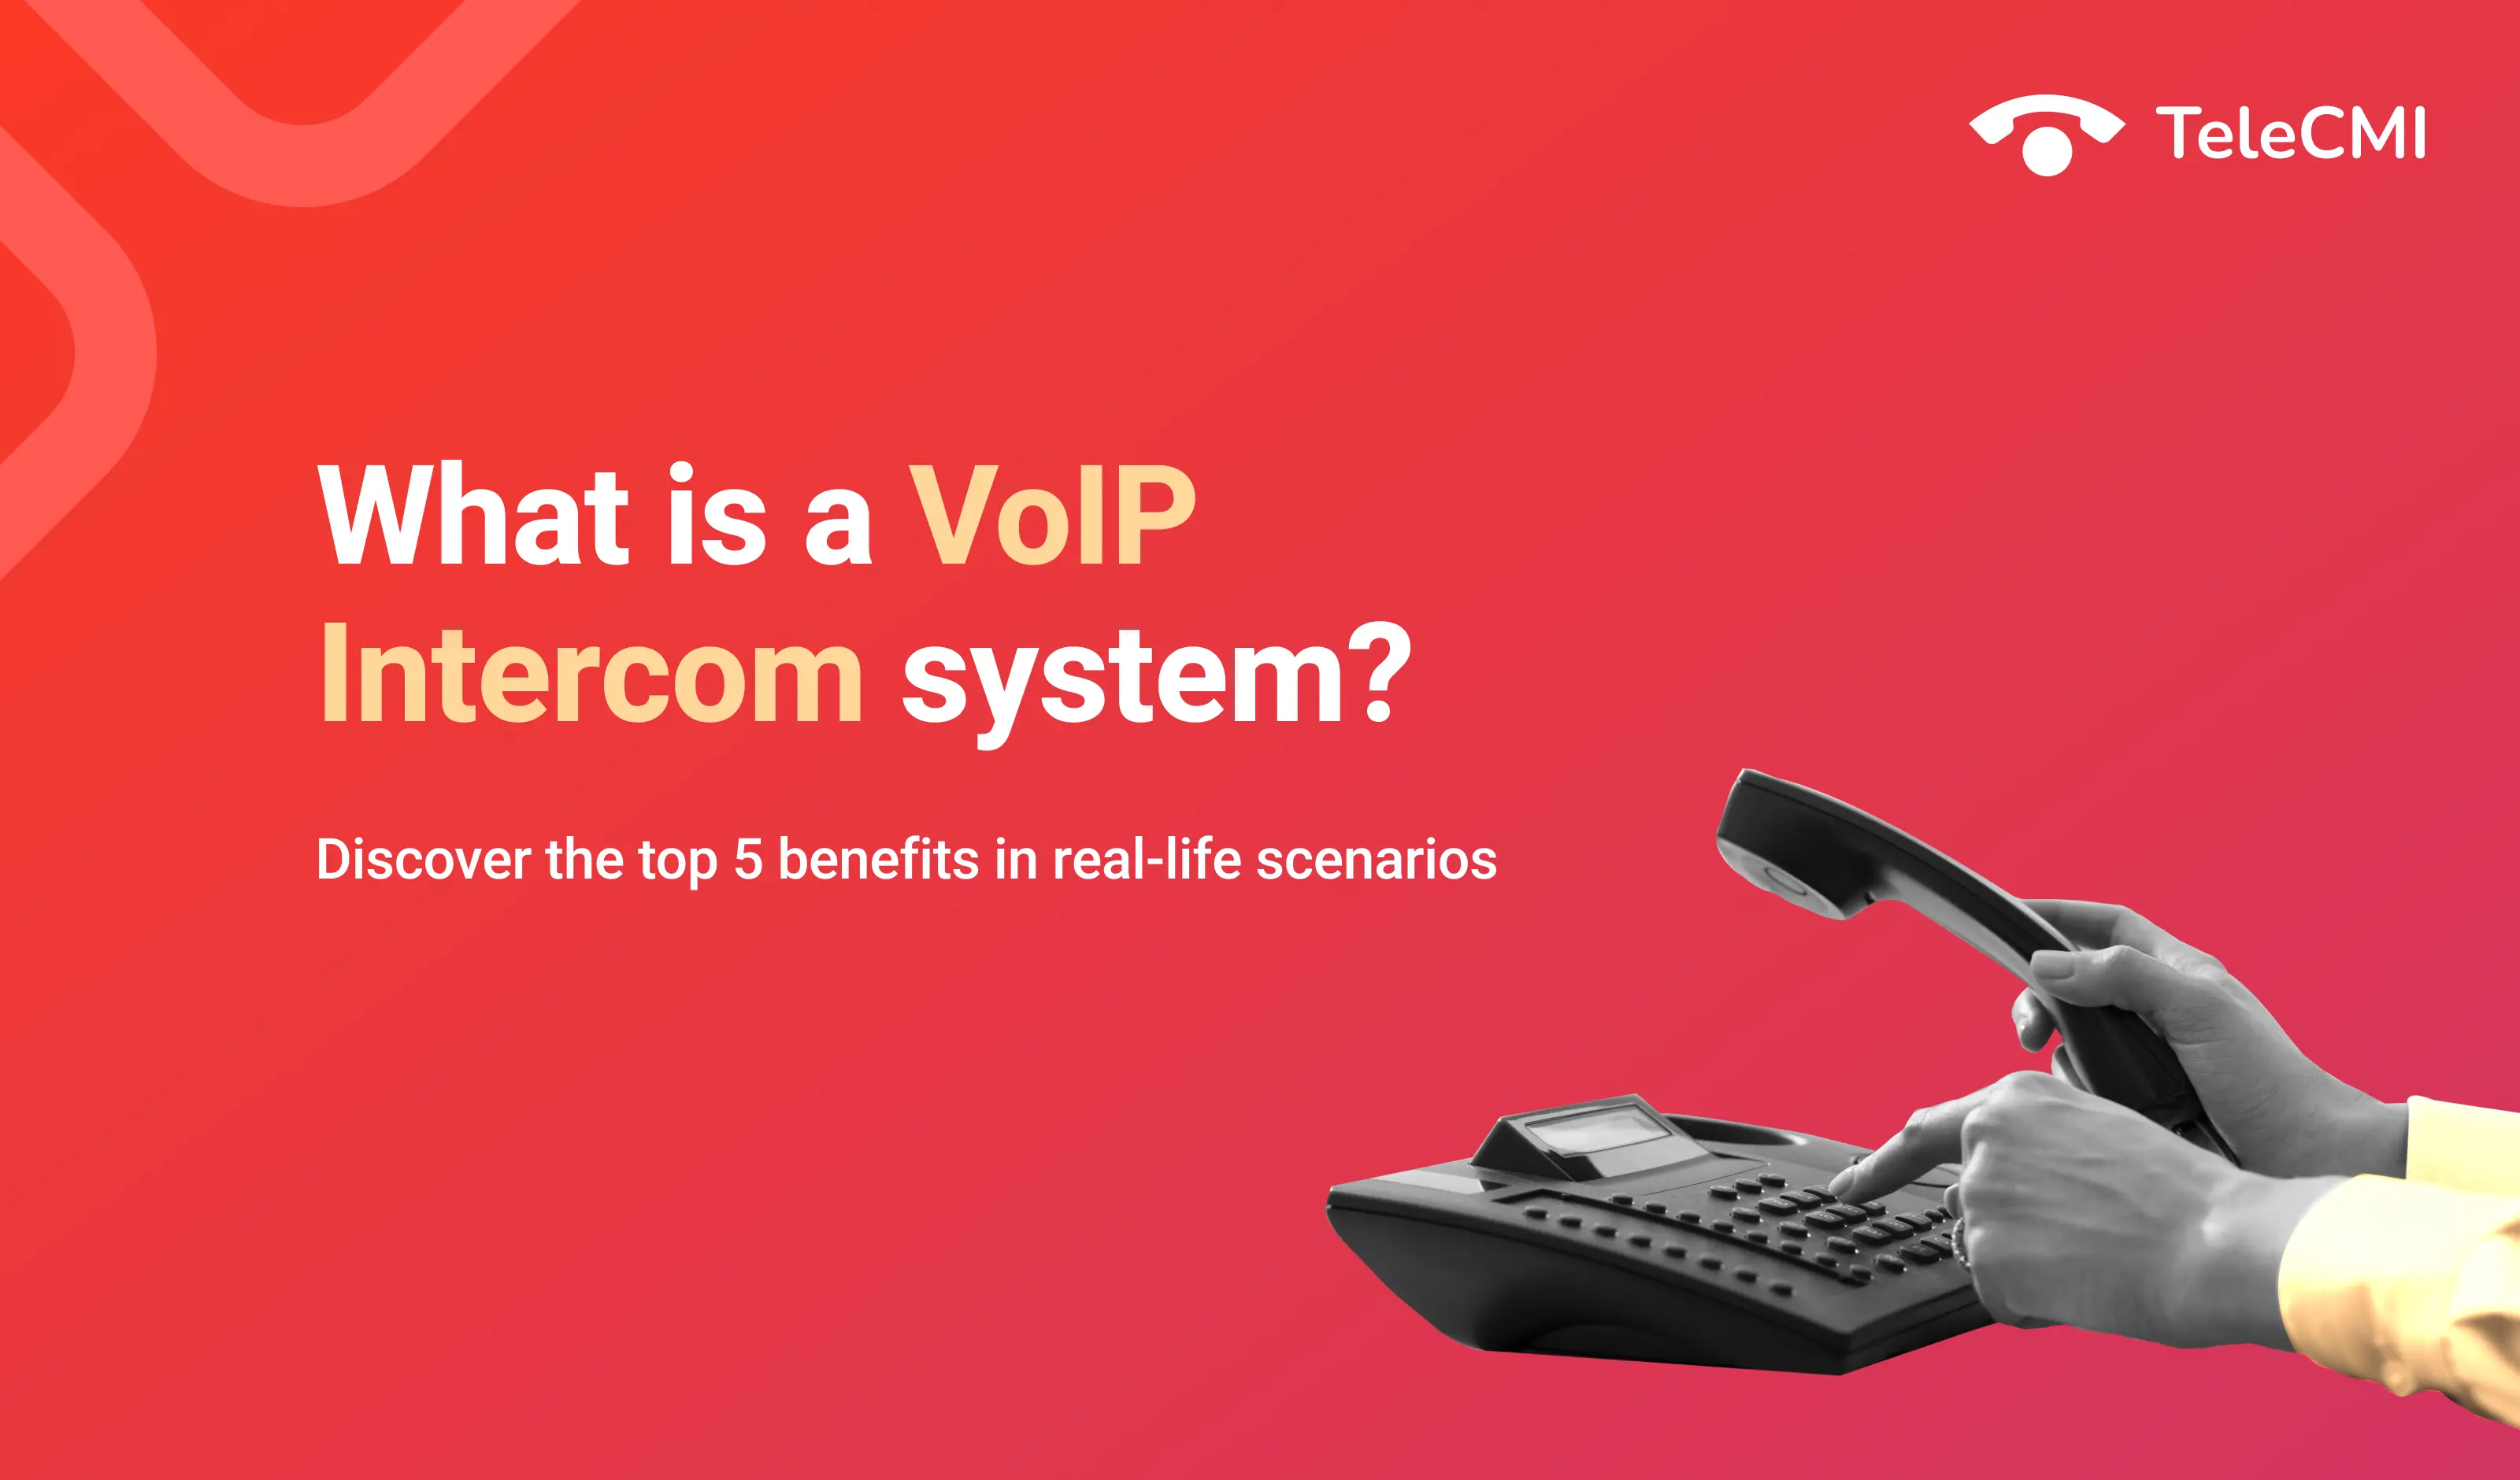 What is a VoIP Intercom System? Discover the Top 5 Benefits in Real-Life Scenarios